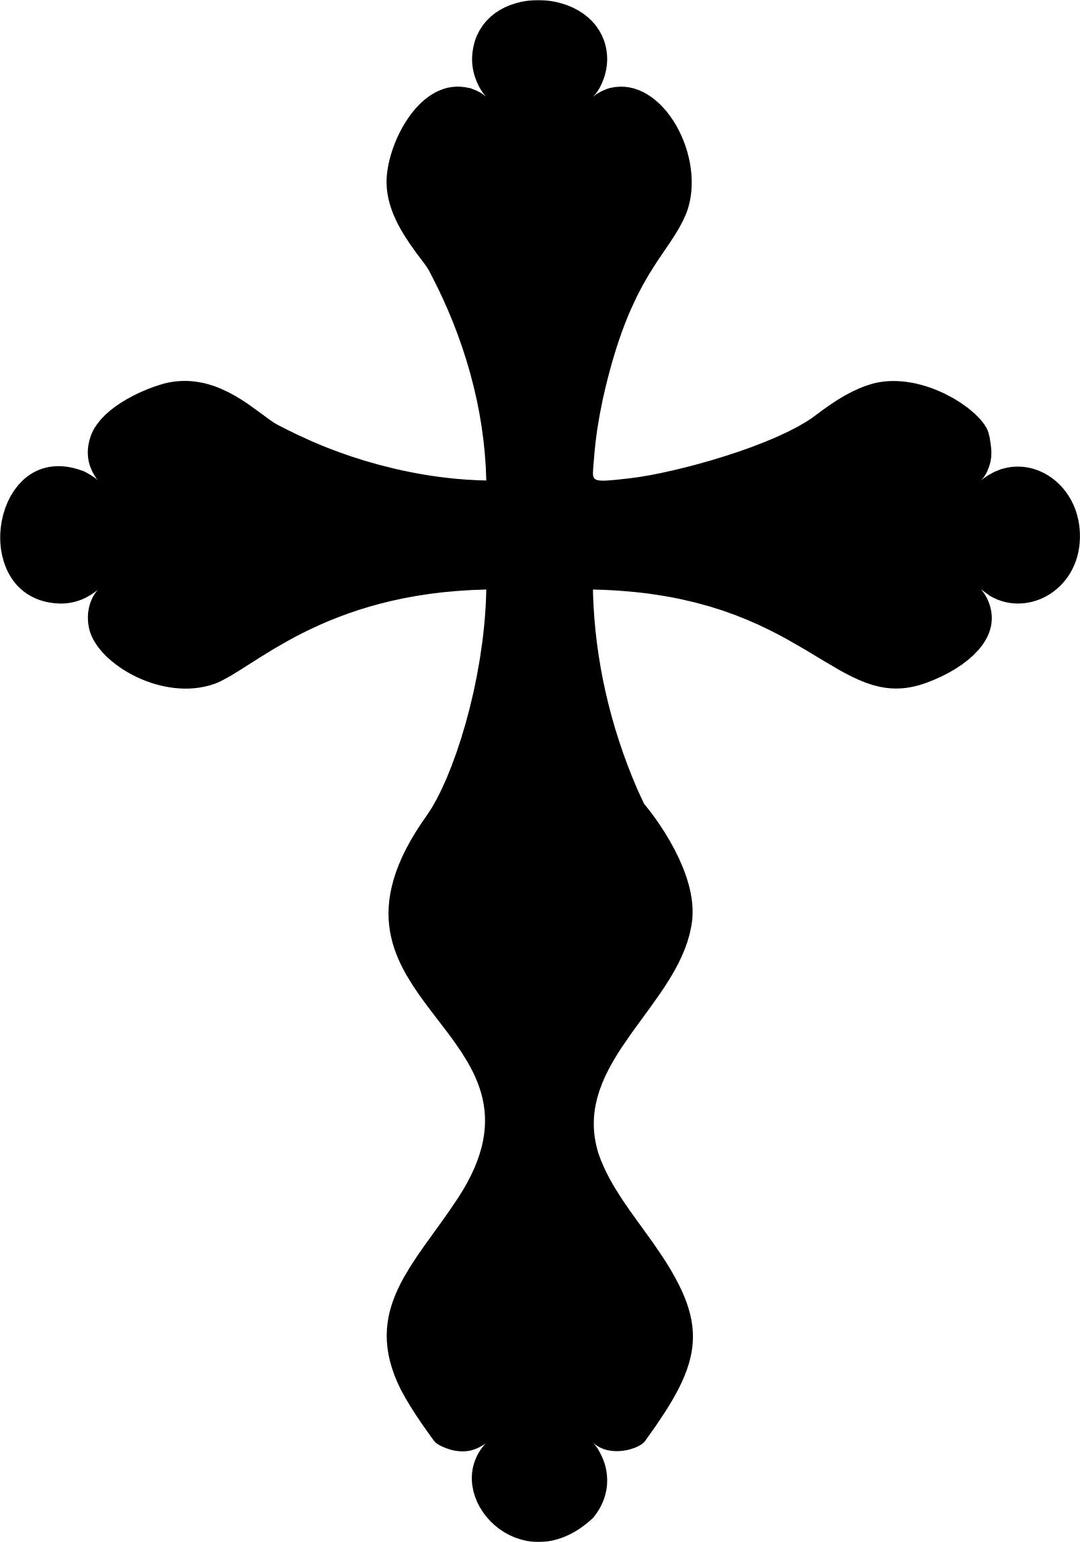 Stylized Cross Silhouette png transparent